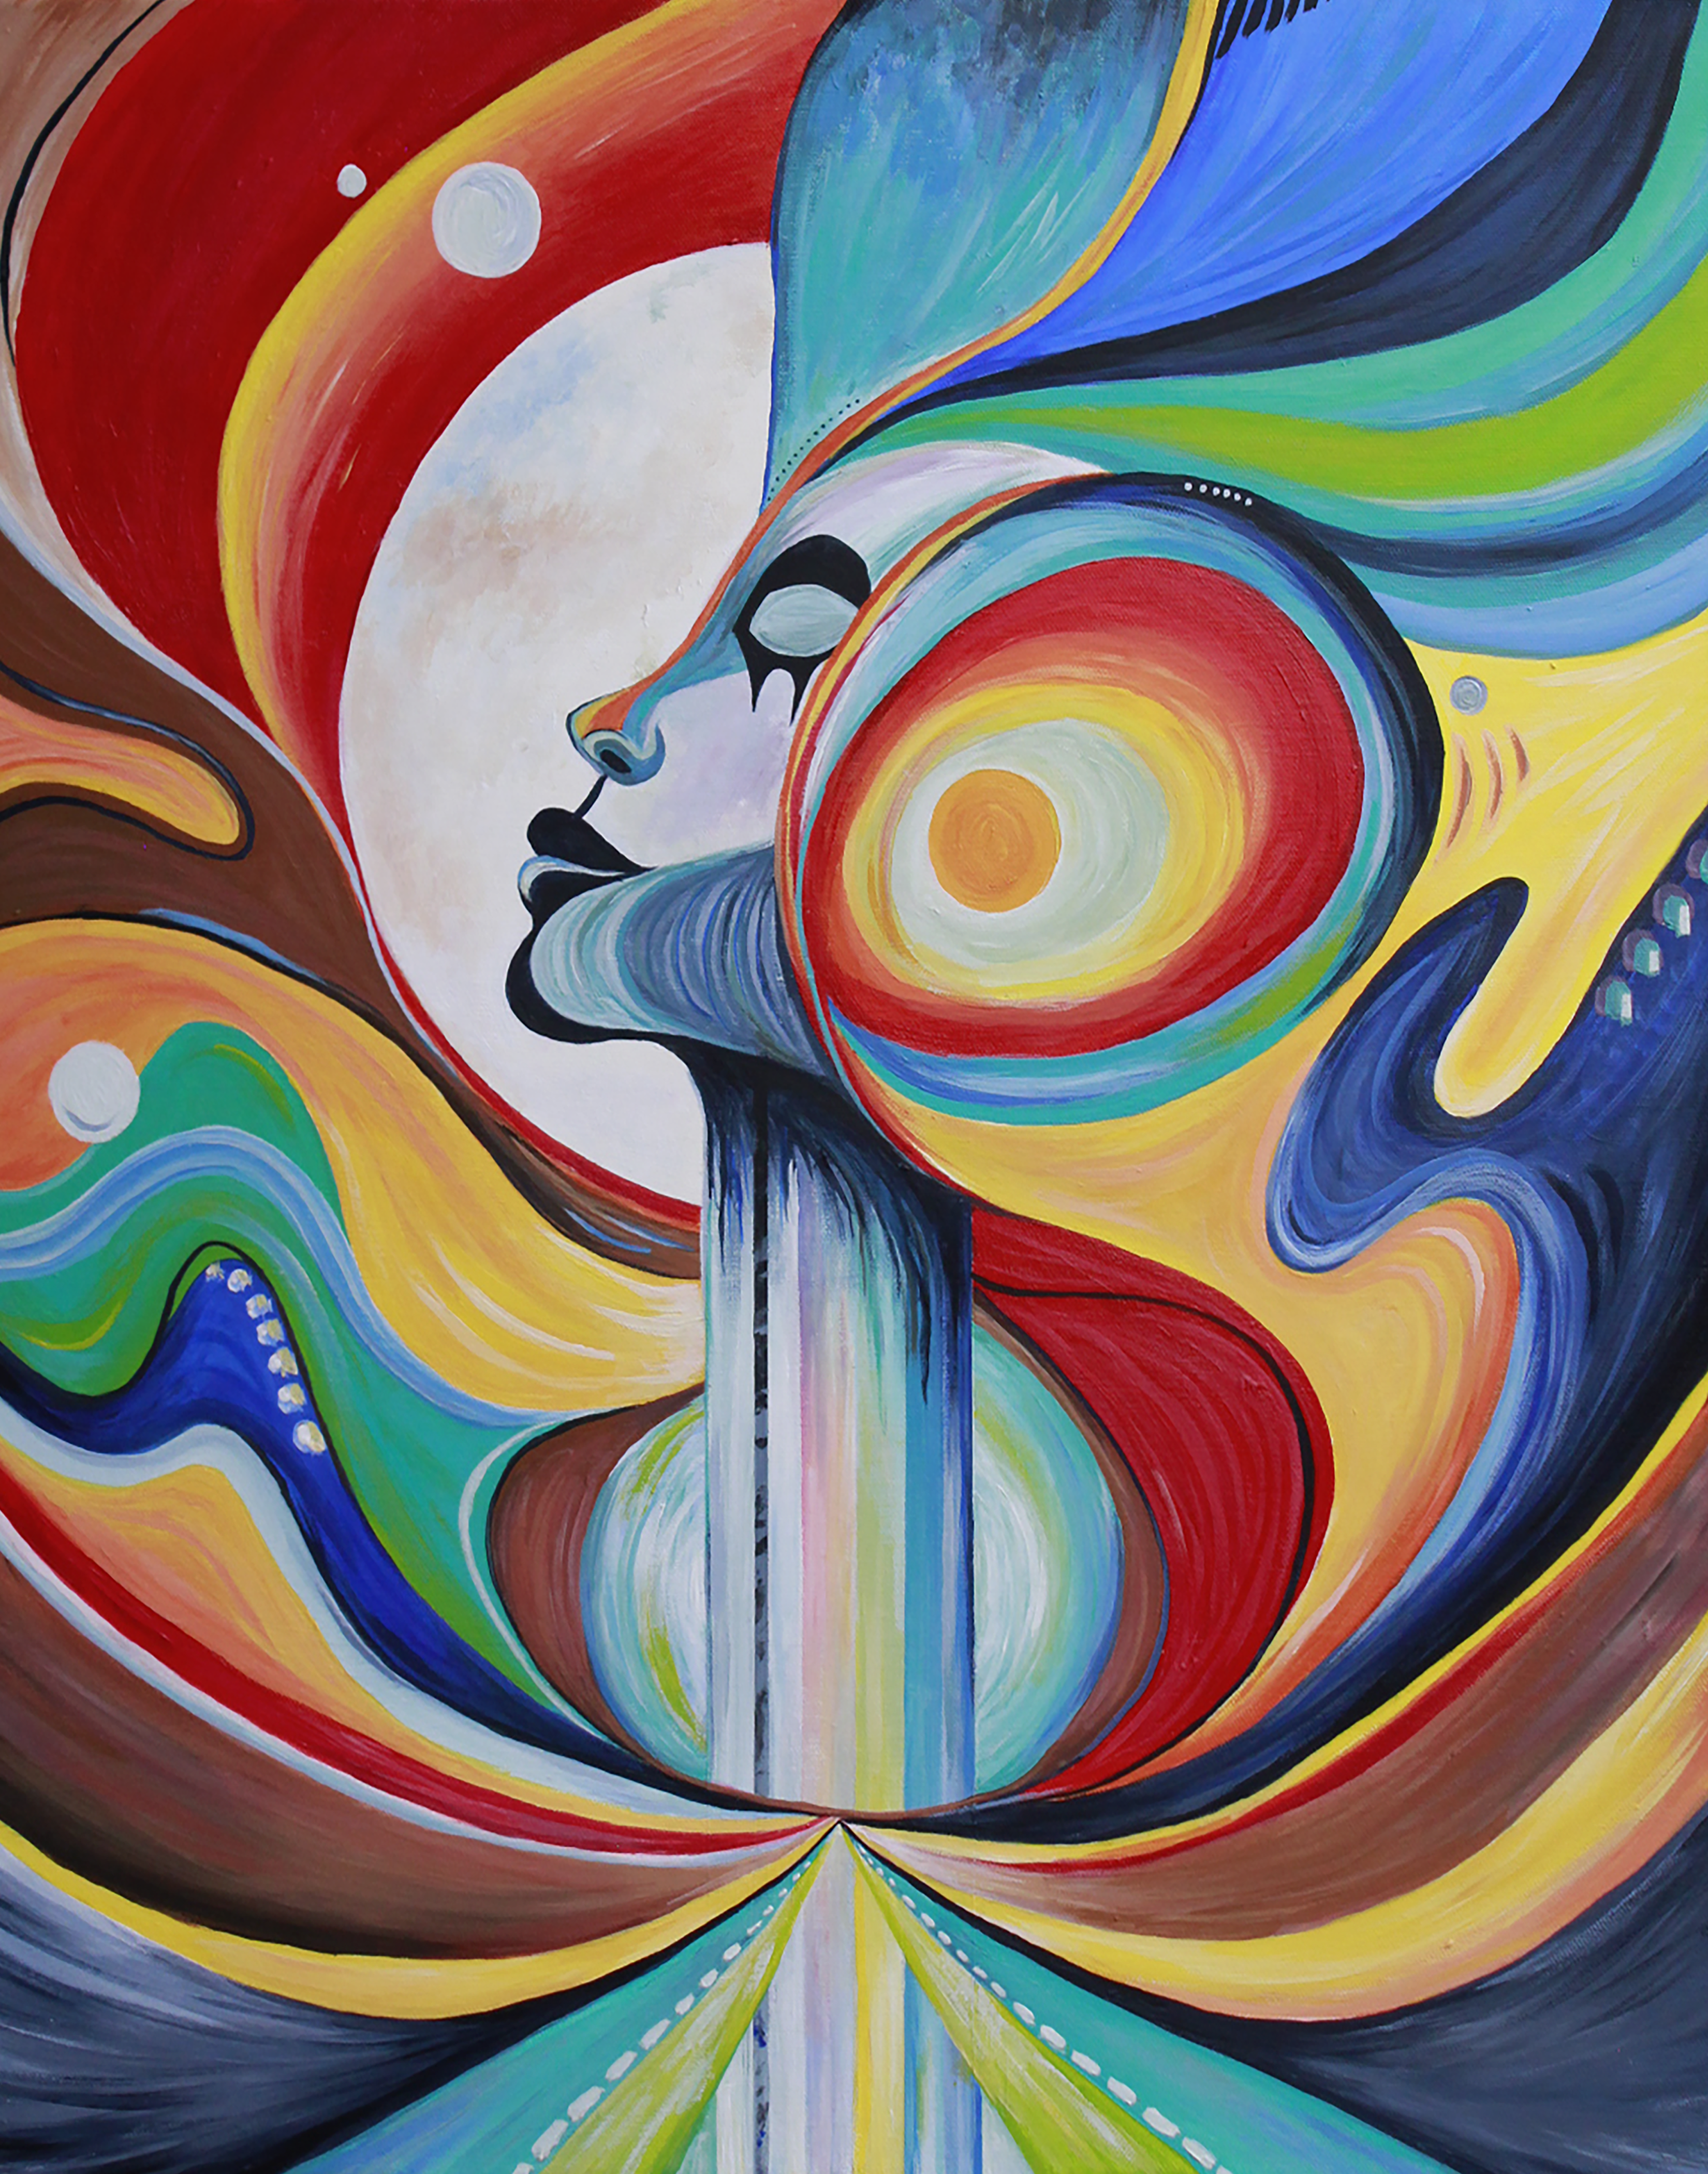 abstract painting with a multidimensional design of a woman's face